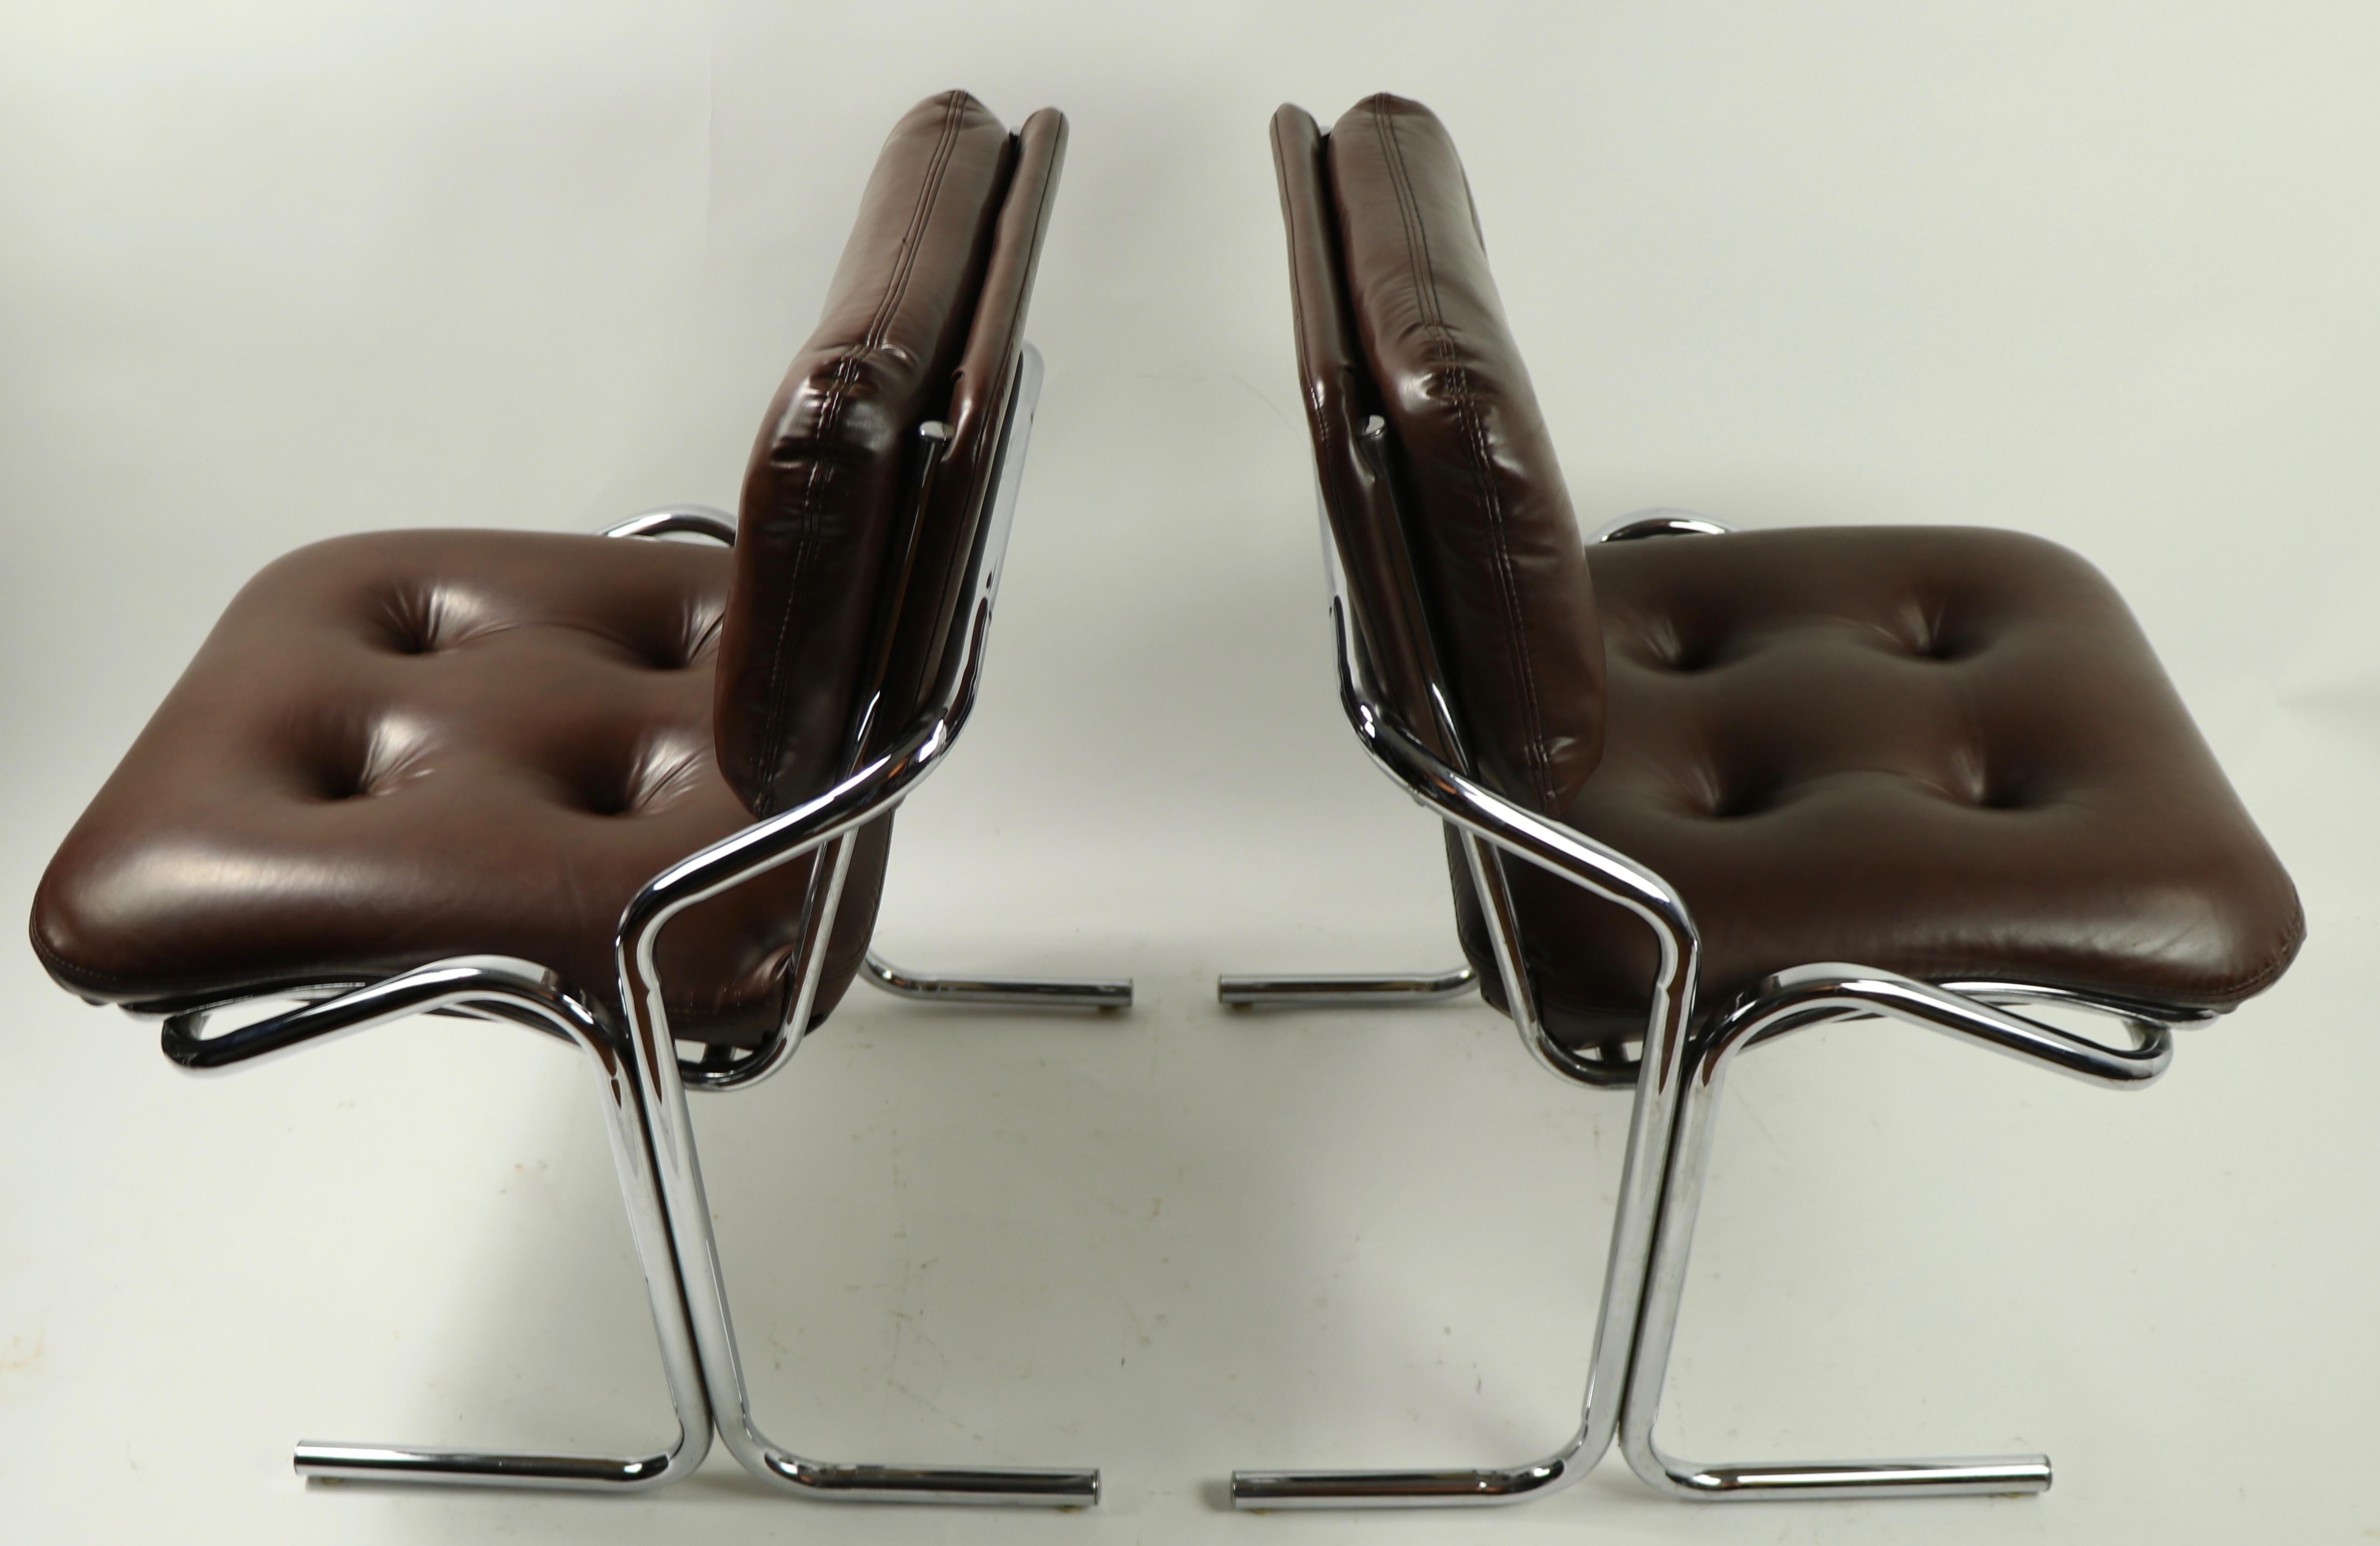 Upholstery Pair of Chrome and Vinyl Chairs by Jerry Johnson